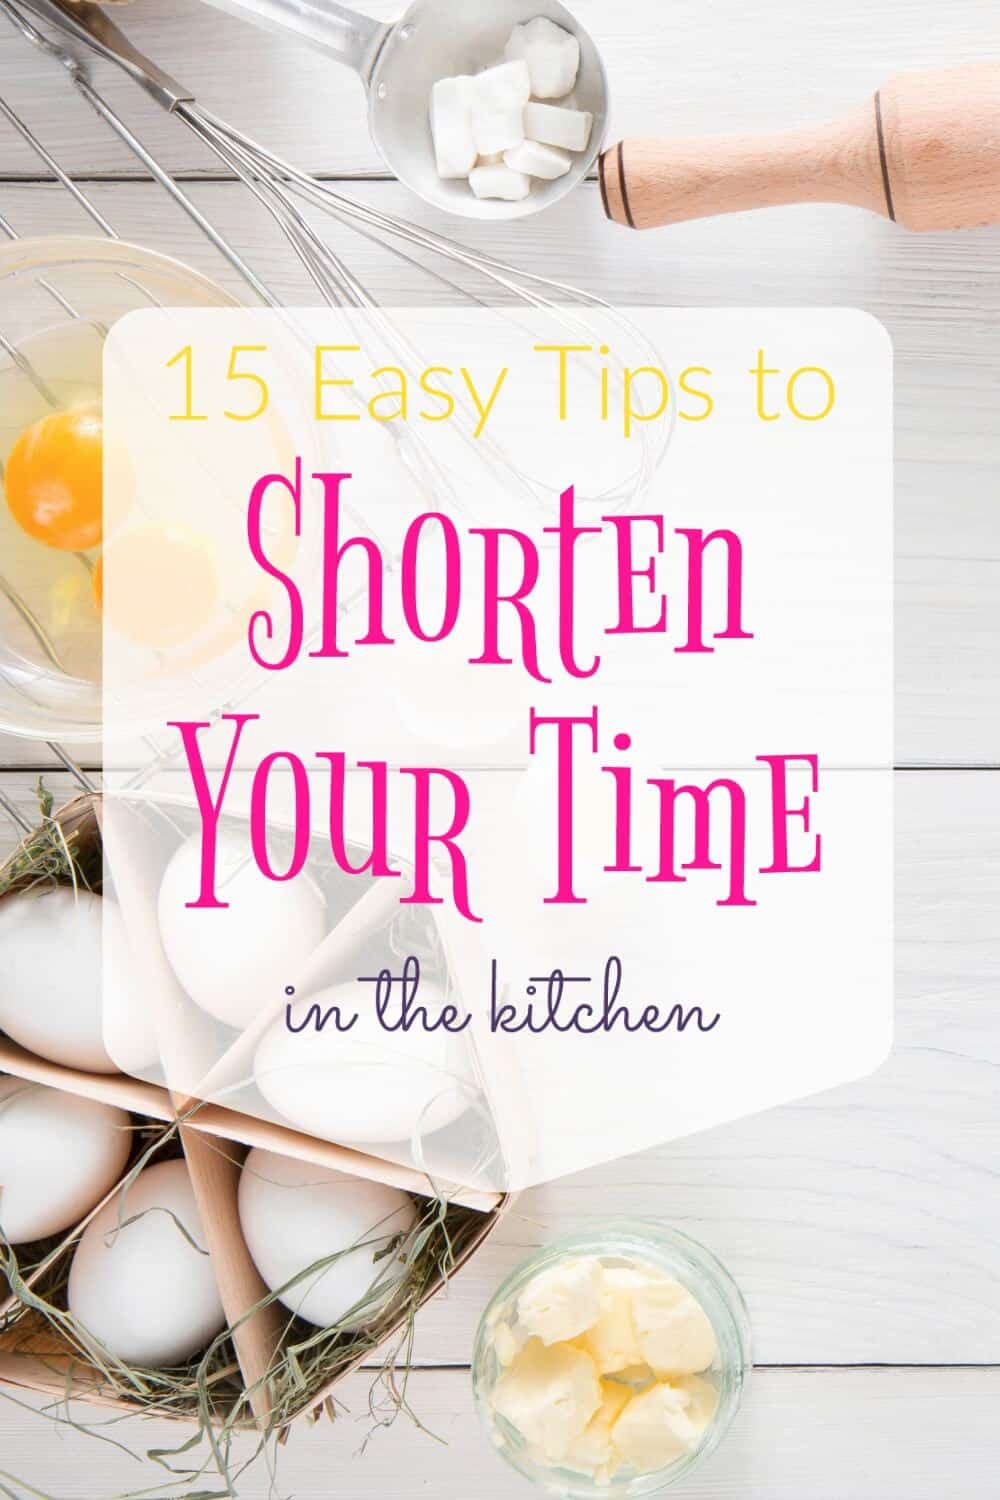 Cooking at home is cheaper, healthier, and great for family connection, but it's also a big pain in the patoot. Try these 15 tips to shorten your time in the kitchen, and get eating sooner!